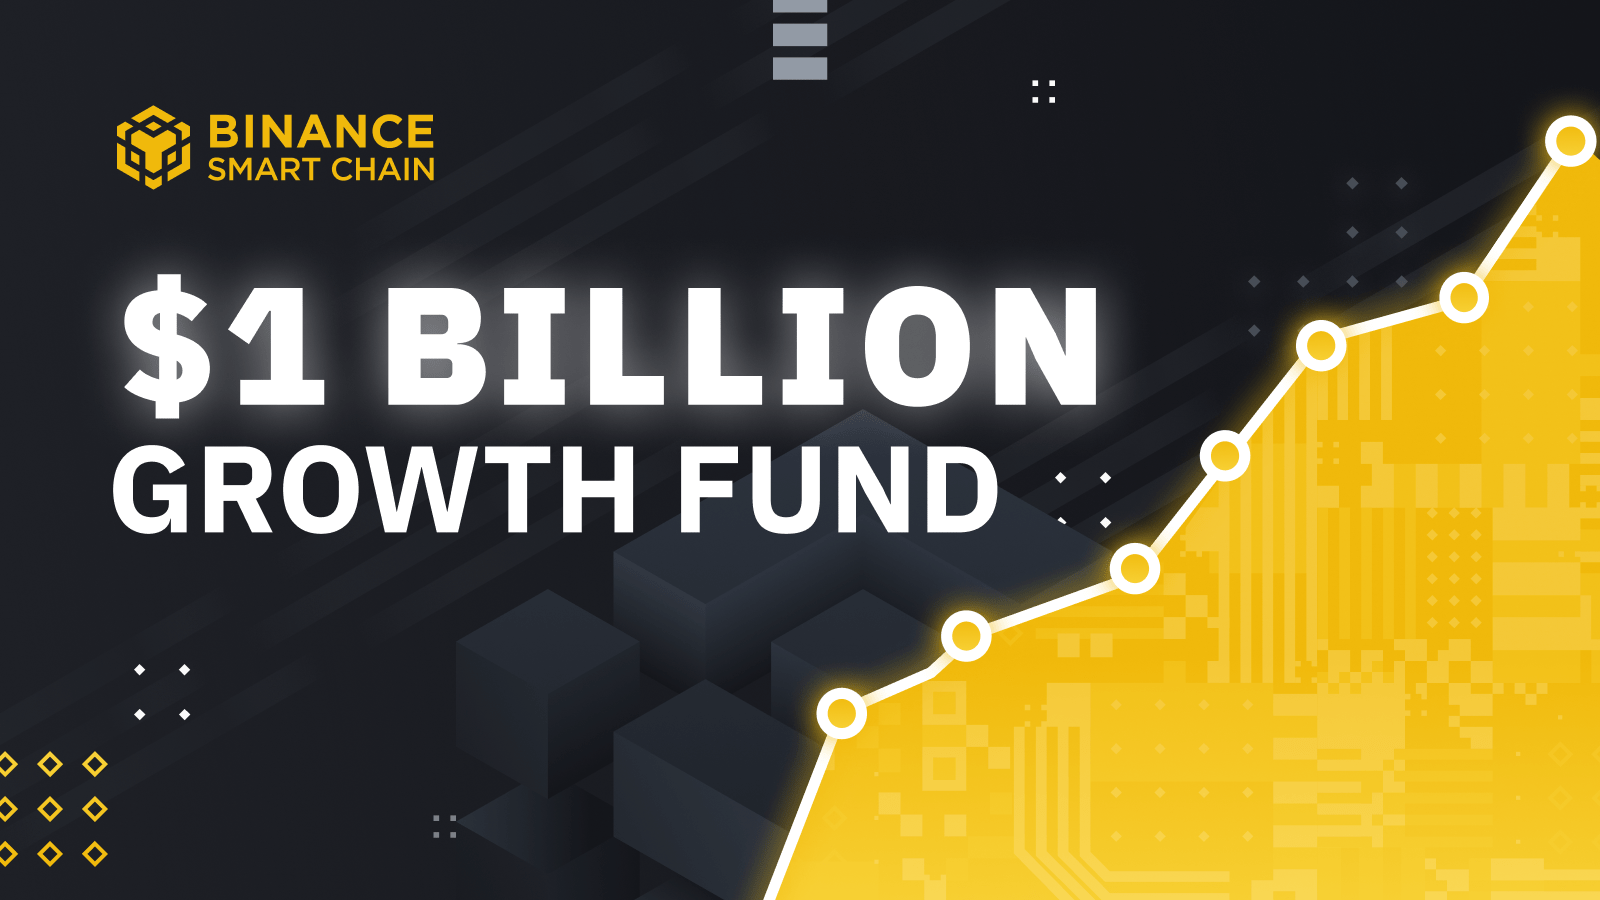 Binance Launches $1 Billion Fund to Drive Smart Chain Adoption and Its Entire Blockchain Industry